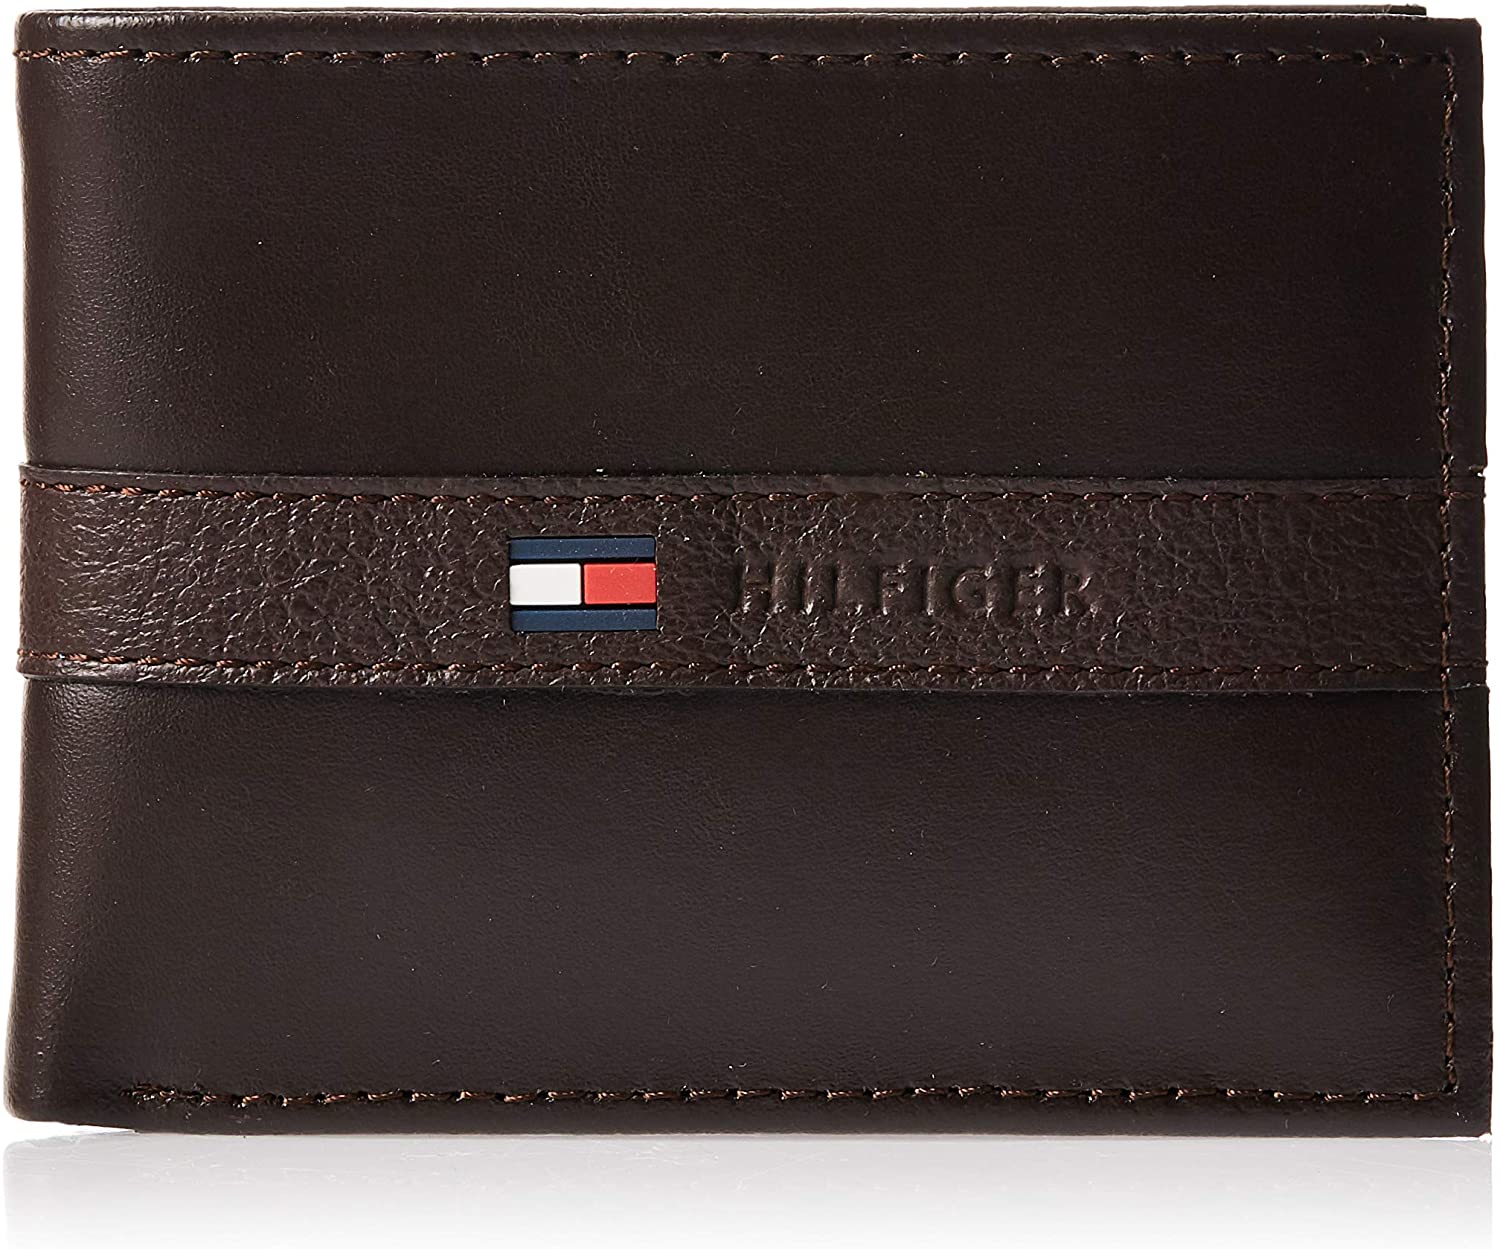 TOMMY HILFIGER - Men's leather wallet with embossed logo